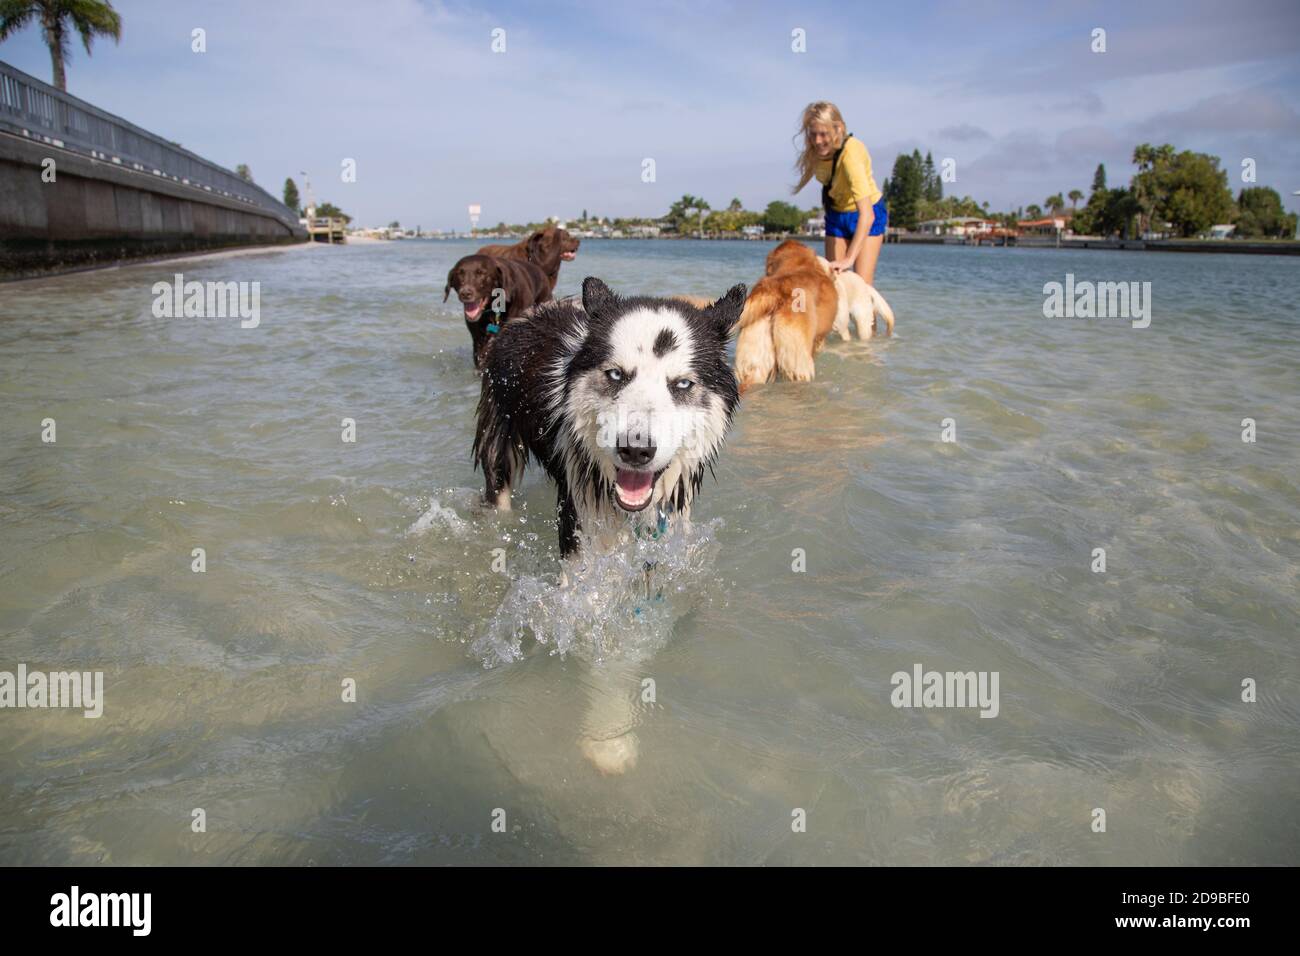 Woman standing in ocean playing with a group of dogs, Florida, USA Stock Photo